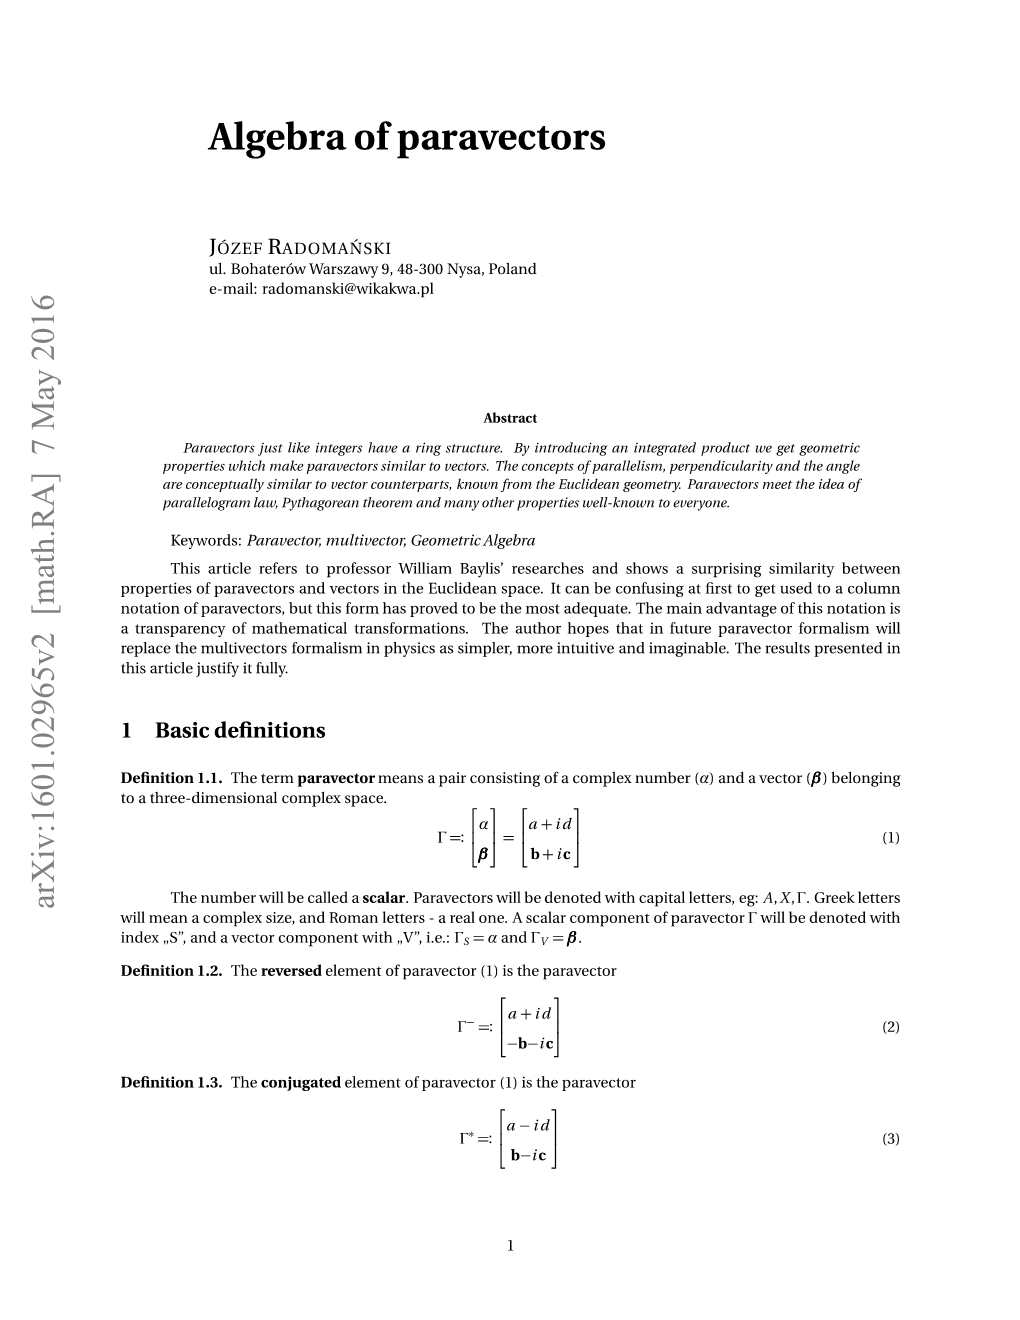 Algebra of Paravectors, Which Contributes to Its Intuitive Understanding